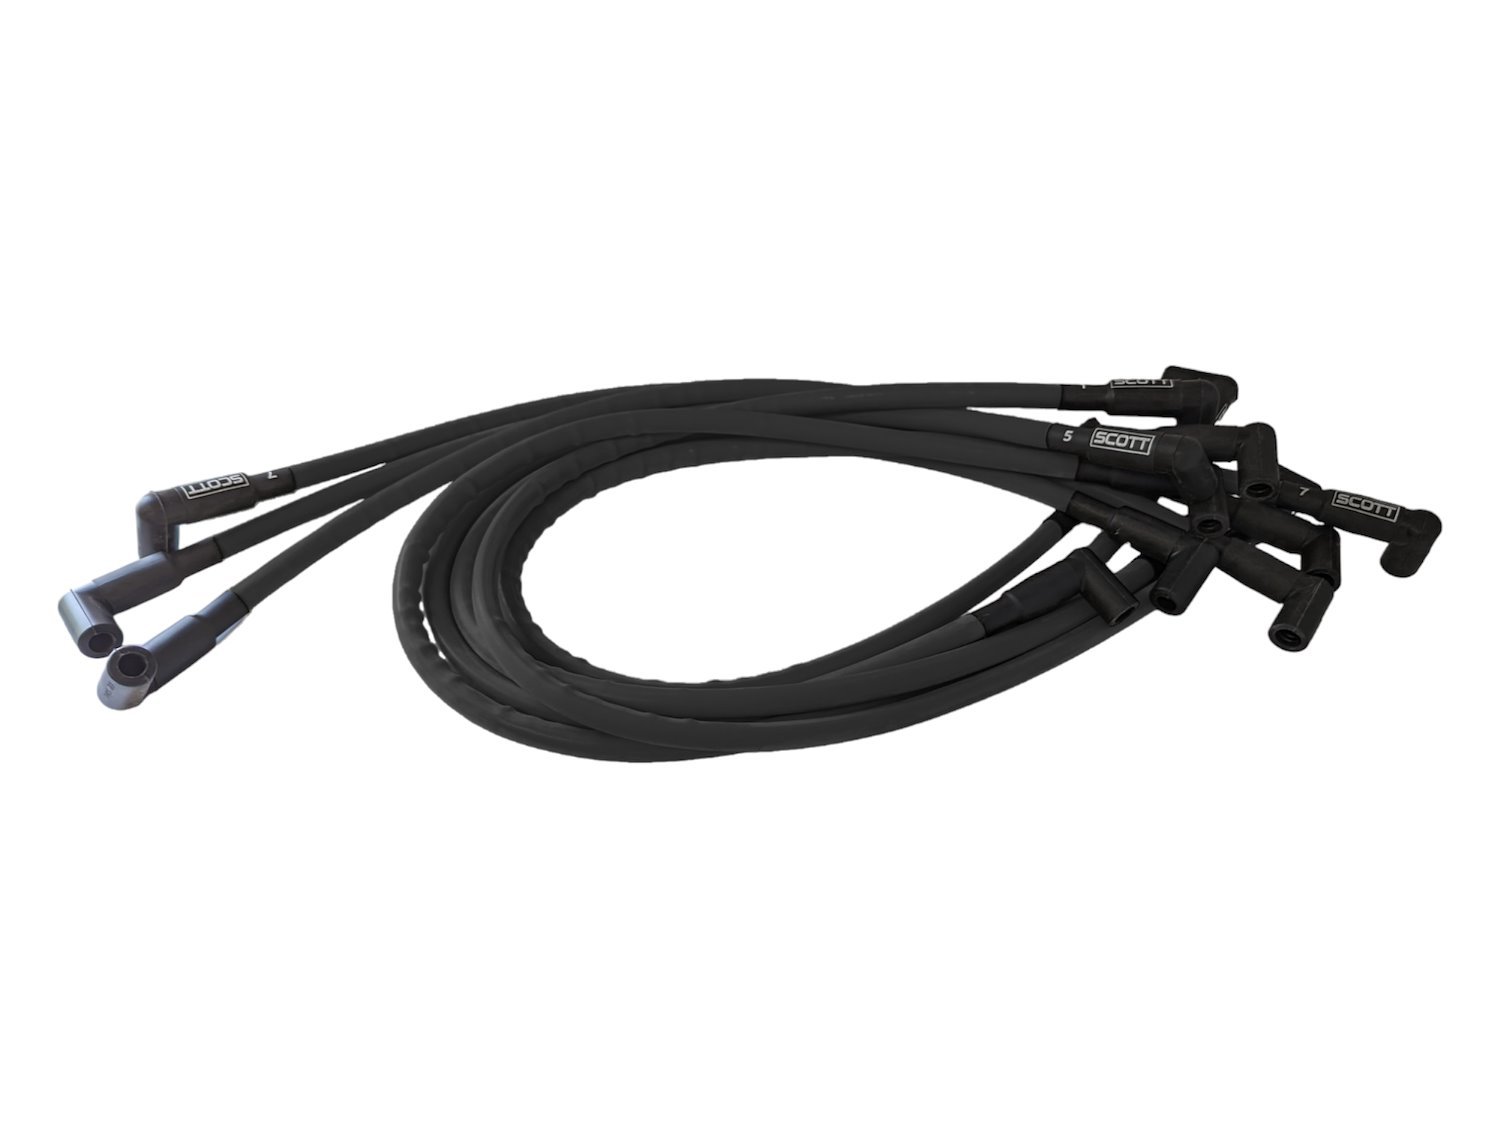 SPW300-CH-402-1 Super Mag Fiberglass-Oversleeved Spark Plug Wire Set for Small Block Chevy, Over Valve Cover [Black]